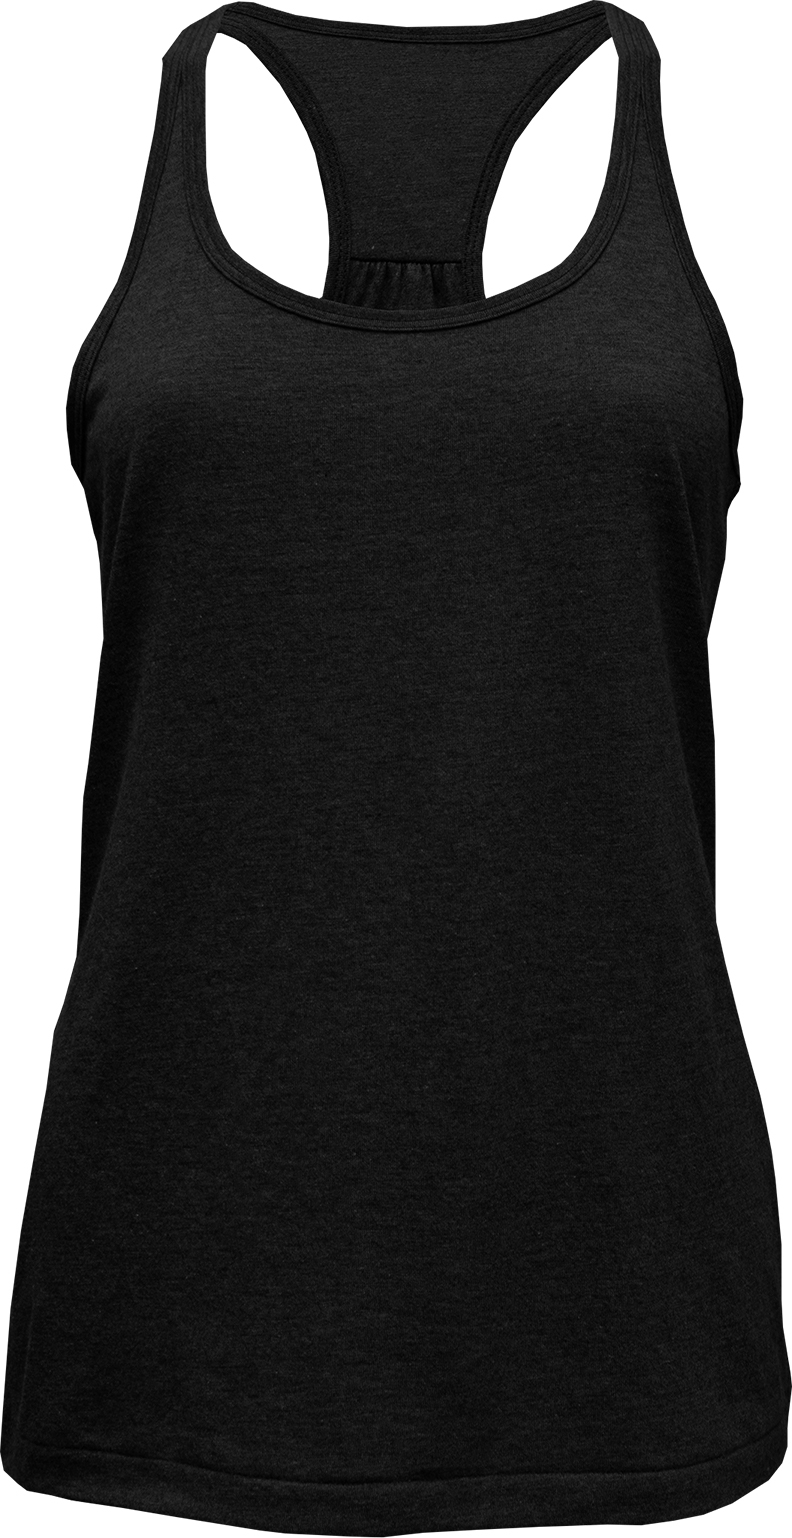 Women's tank top with athletic back